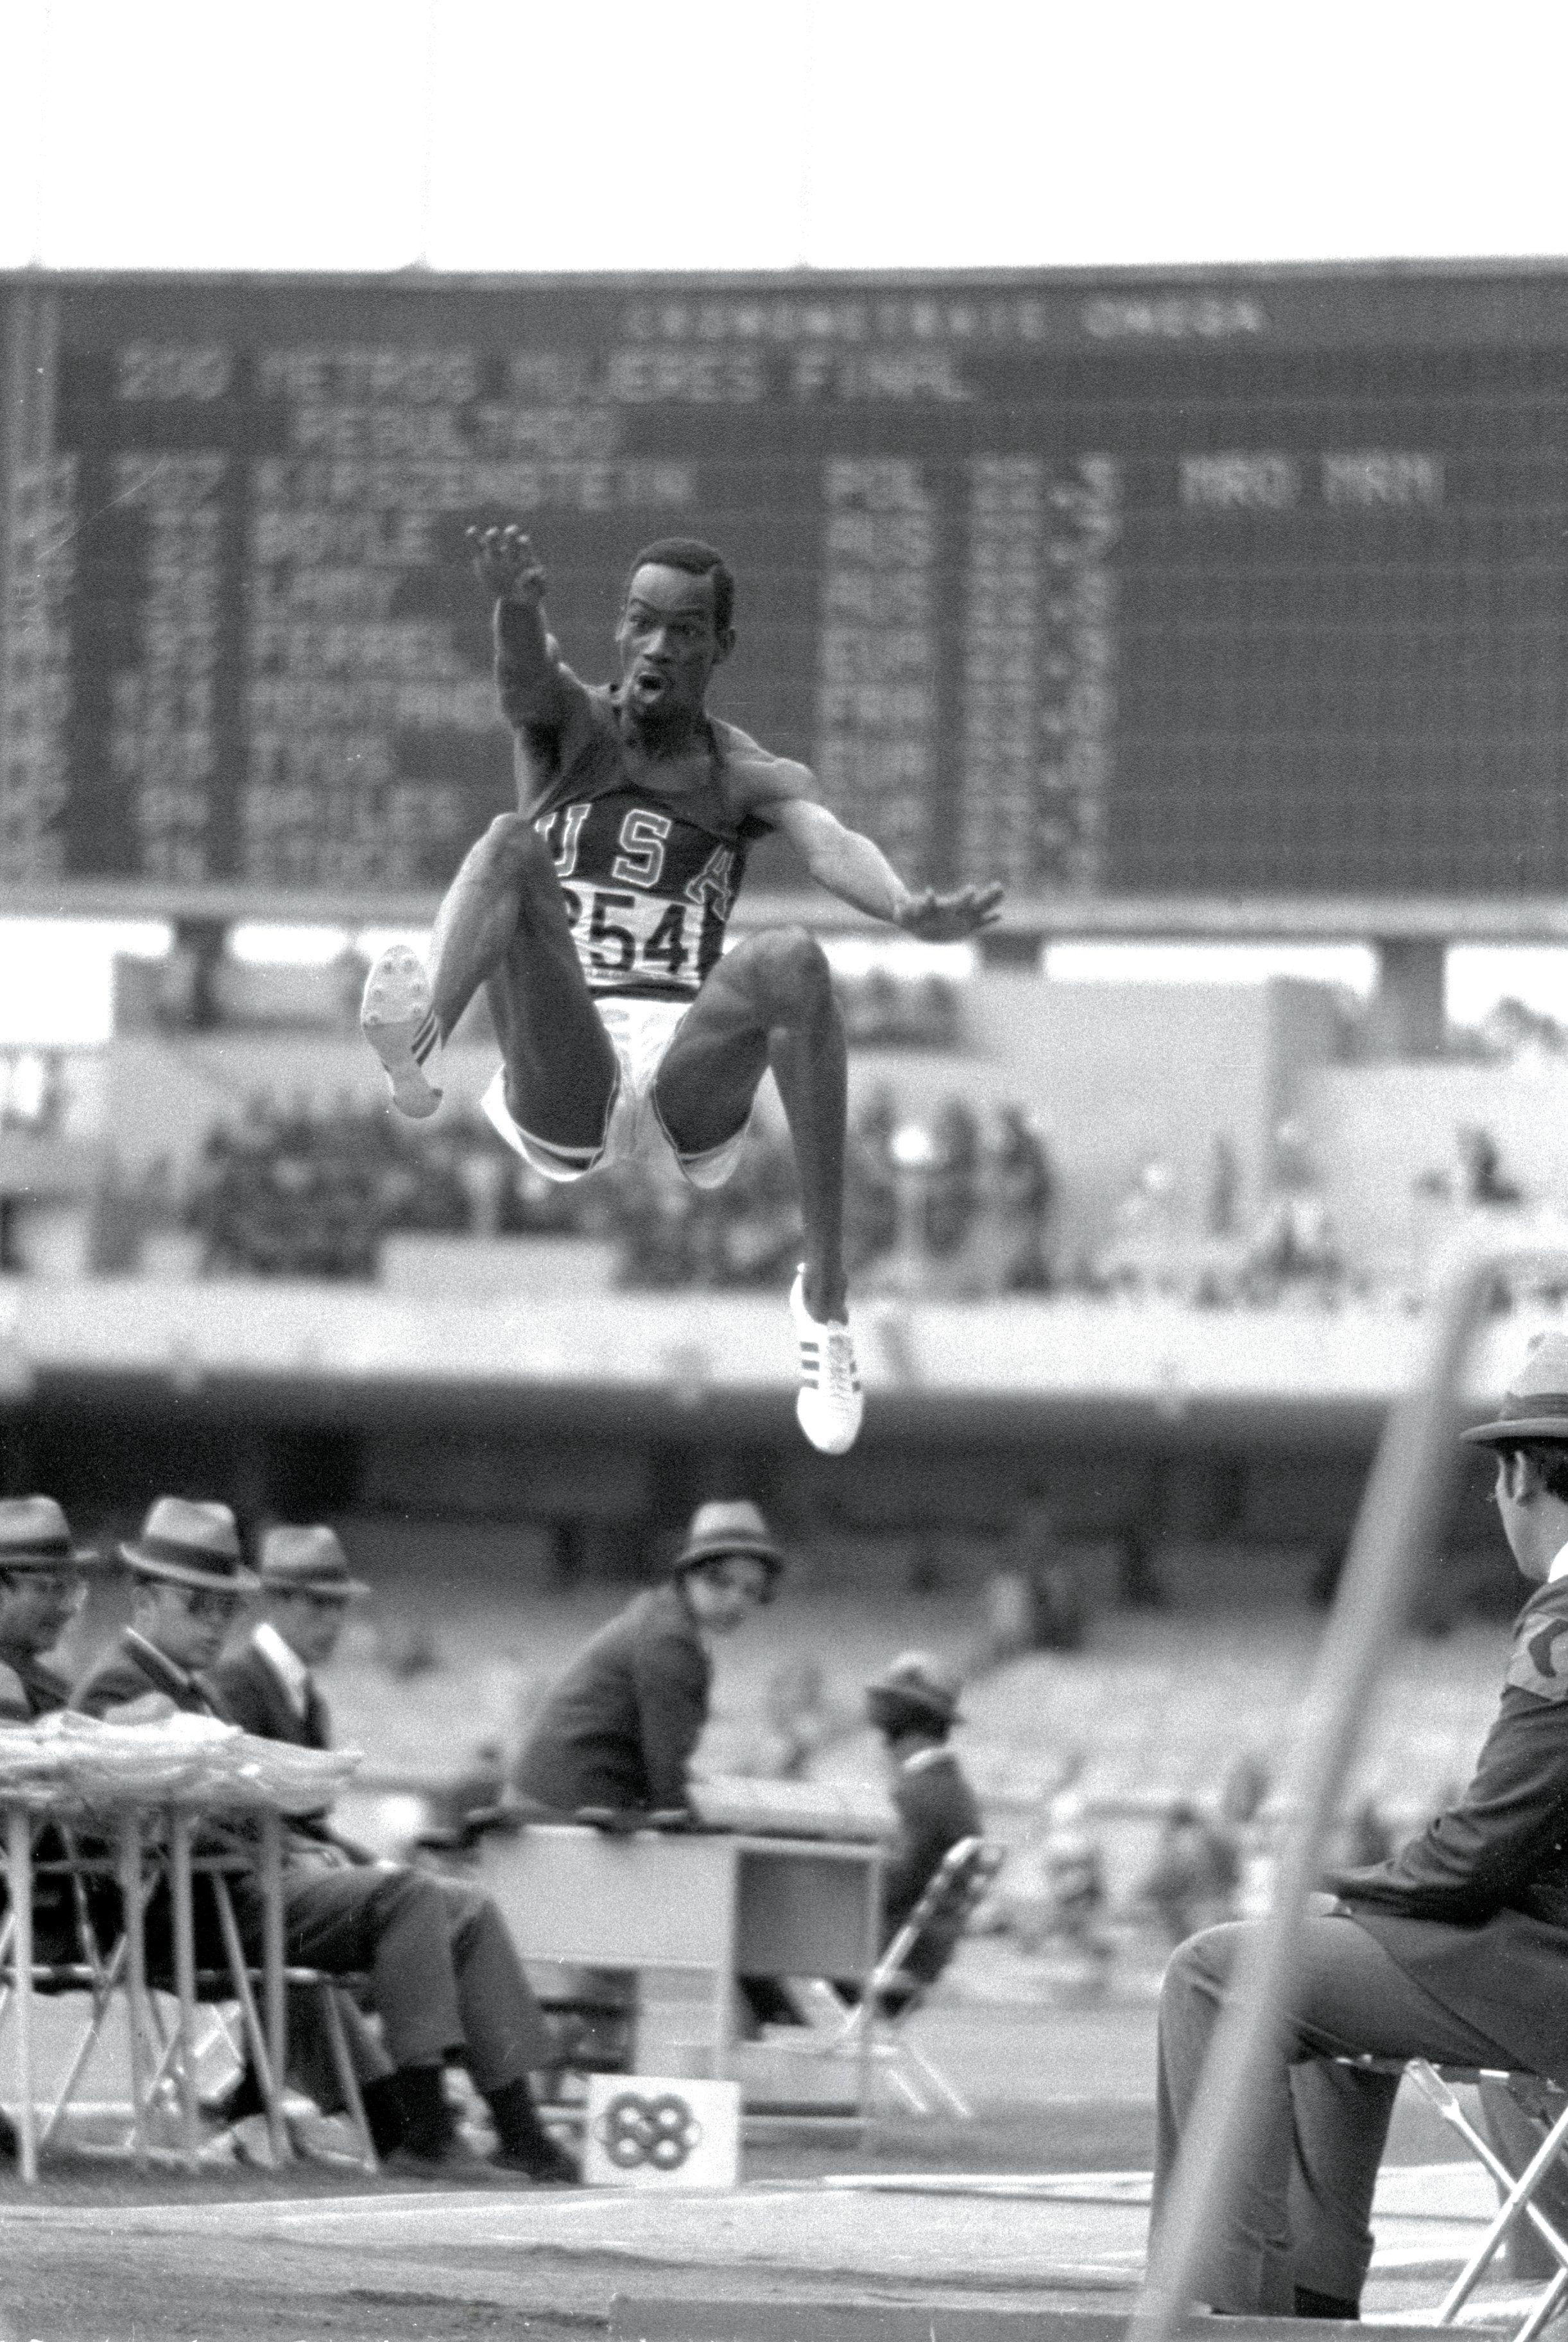  18 Oct 1968:. Bob Beamon # 254 of the US  breaking the Long Jump World Record during the  1968 Olympic Games in Mexico City, Mexico Beamon  long jumped 8.9 m (29 ft 2 1/2 in), winning the  gold medal and setting a new . It is the first  world record jump over 28 ft The most famous long  jump ever Achieved:. Bob Beamon of the United  States takes off for a place in sporting history  as he leaps 8.90 meters at the Mexico City Games  of 1968. While the middle distance runners from  the low level countries floundered in the thin air  of Mexico City, Those in the explosive events  reached new peaks, none higher than Beamon, who  added 58 centimètres to the world record with a  jump aided by a wind of 2 meters per second the  very limit of wind assistance. In Imperial measure  terms it Looked even more impressive since he  missed out 28 feet, taking the record to 29 ft 2  ins. Yet Beamon never again managed a jump of 27  feet. It was twelve years before anyone else  reached 28 feet (8:53 meters) and the record stood  until 1991 When Mike Powell of the US leapt 8.95  meters in Tokyo to win the world title. His jump  which at sea level and wind assistance of 0.3mps.  Mandatory Credit: Tony Duffy / Allsport 